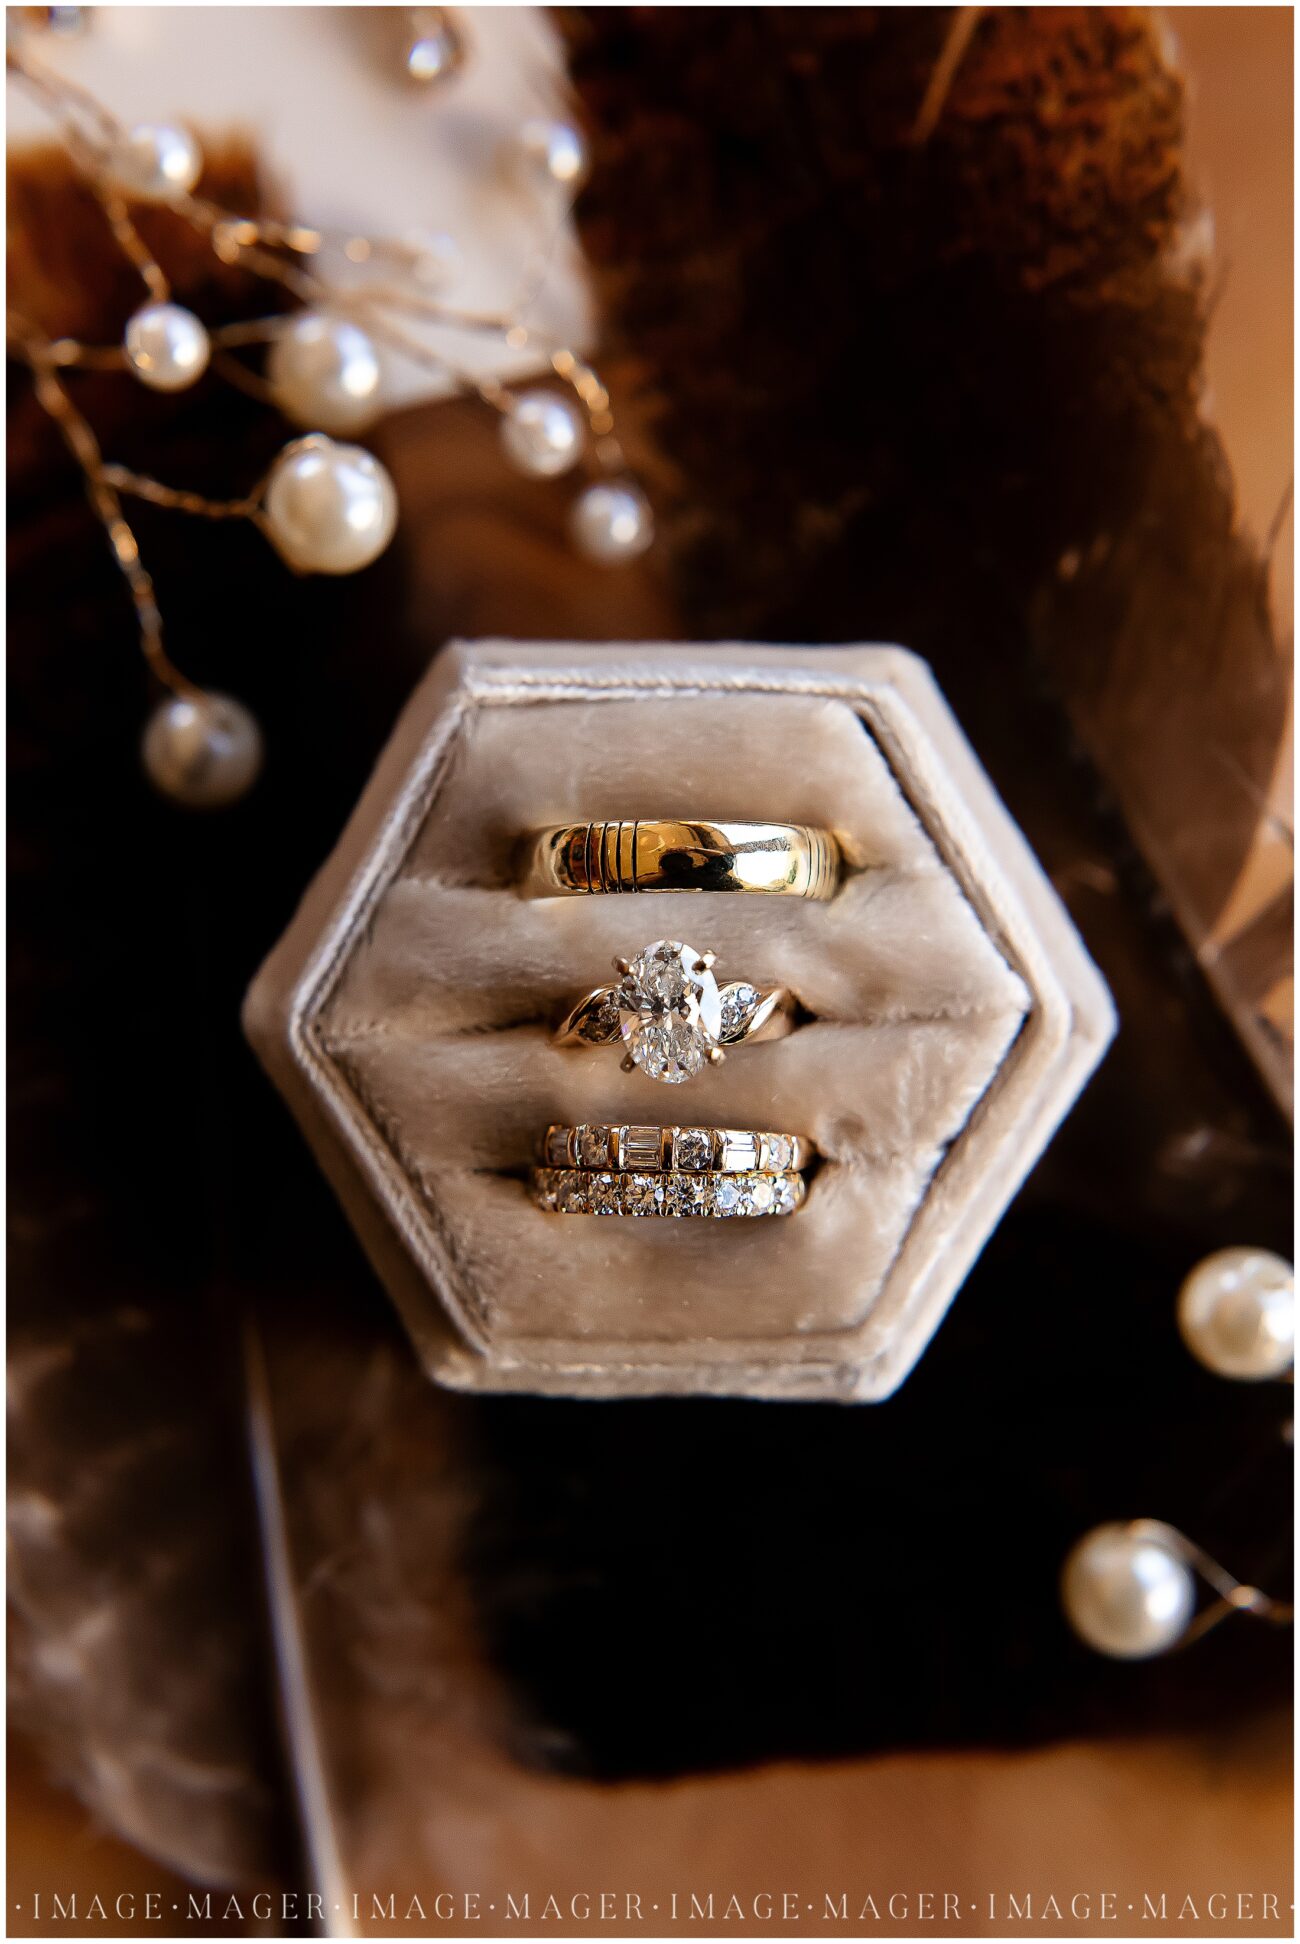 A small town wedding detail photo of the couple's rings in a velvet ring box.

L'erable, IL. Photo taken by Mager Image Photography.